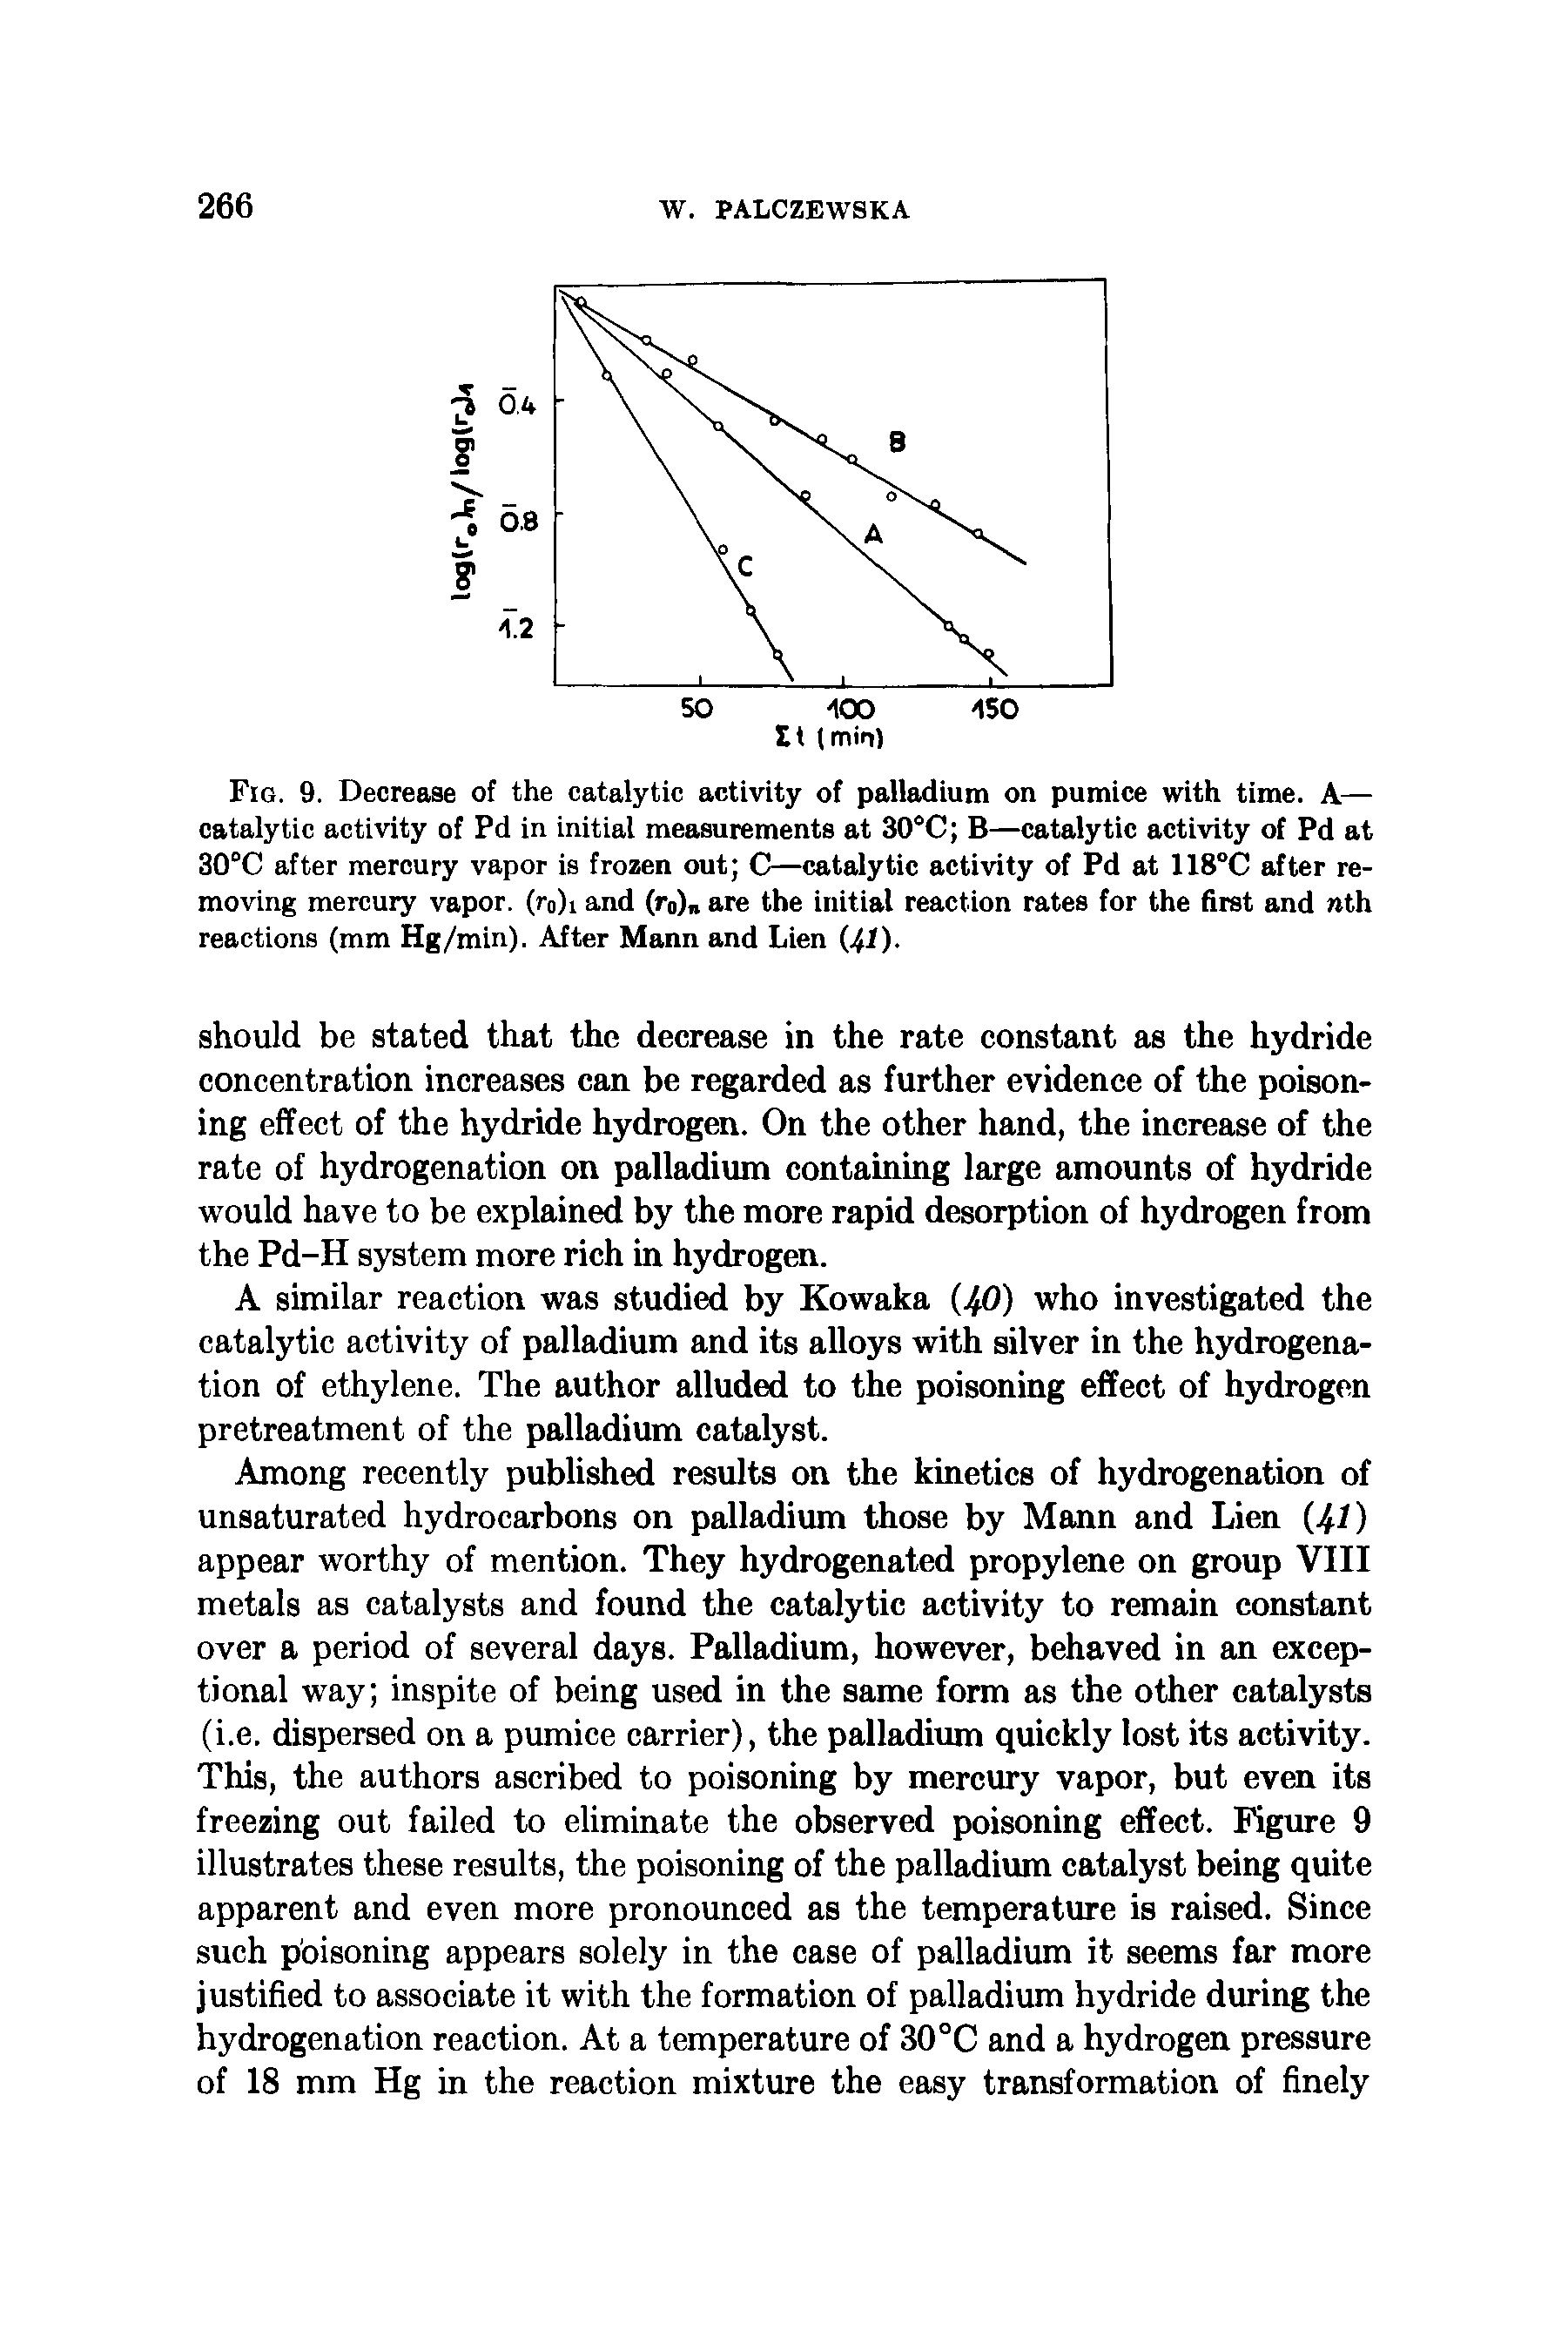 Fig. 9. Decrease of the catalytic activity of palladium on pumice with time. A— catalytic activity of Pd in initial measurements at 30°C B—catalytic activity of Pd at 30°C after mercury vapor is frozen out C—catalytic activity of Pd at 118°C after removing mercury vapor. (r0)i and (r0) are the initial reaction rates for the first and nth reactions (mm Hg/min). After Mann and Lien (41)-...